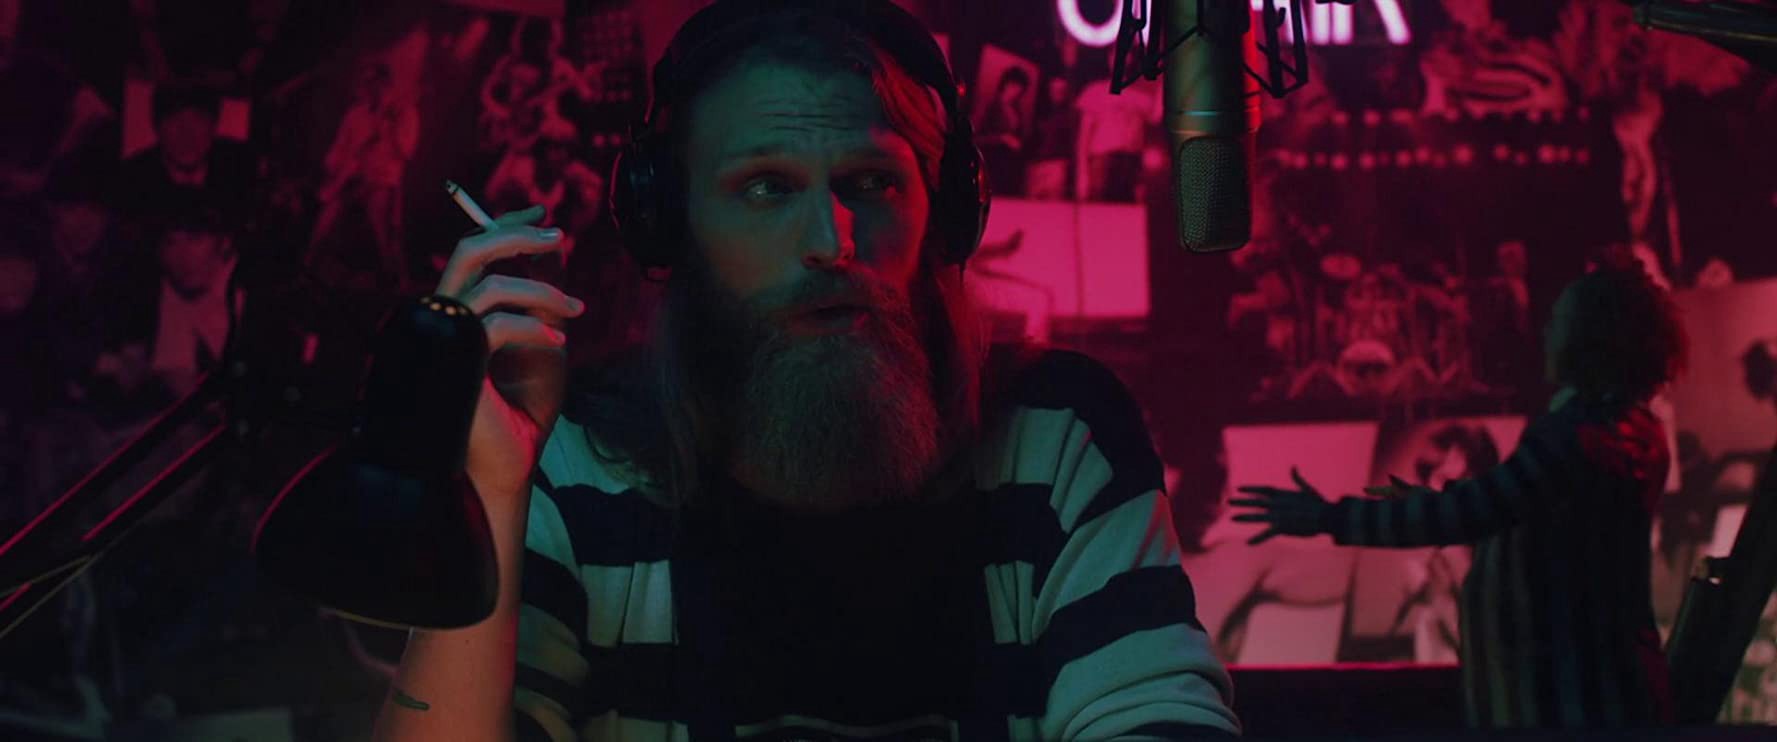 A bearded man, wearing a striped black and white top, sits in front of a radio microphone holding a cigarette. He is bathed in blue and red lighting and in the background are vague horror and band posters.